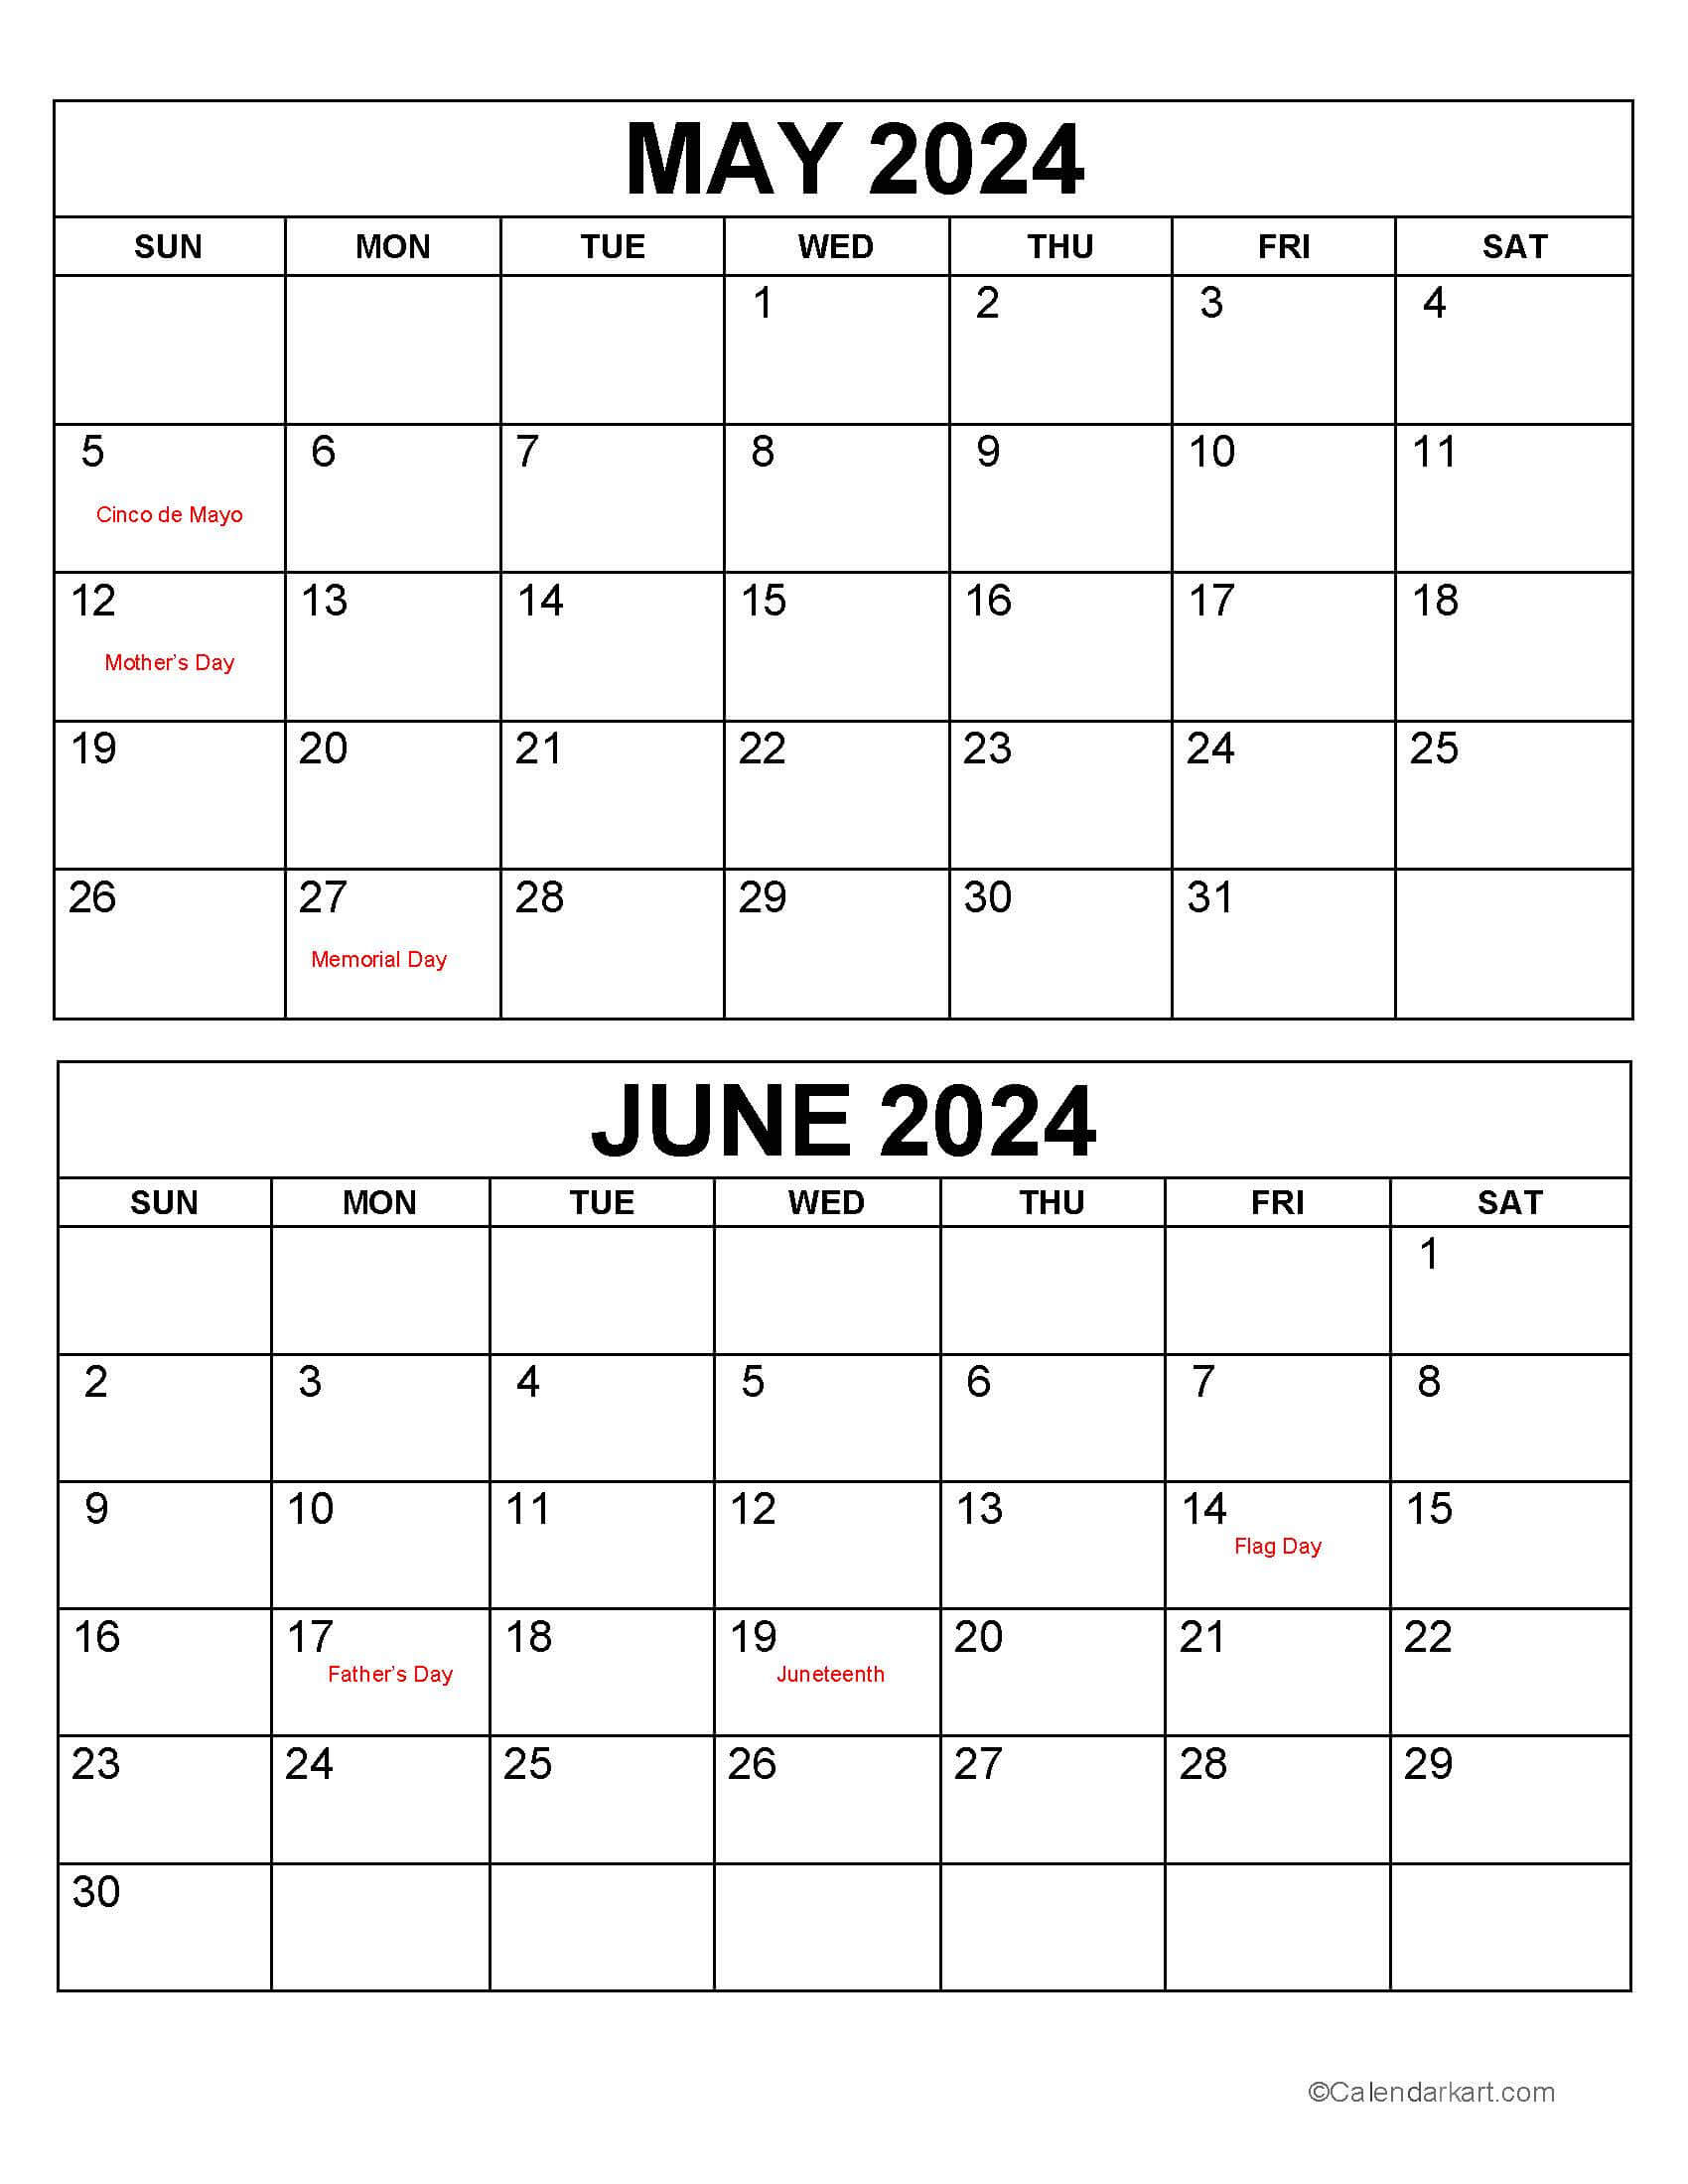 May June 2024 Calendars (3Rd Bi-Monthly) - Calendarkart within Calendar For May And June 2024